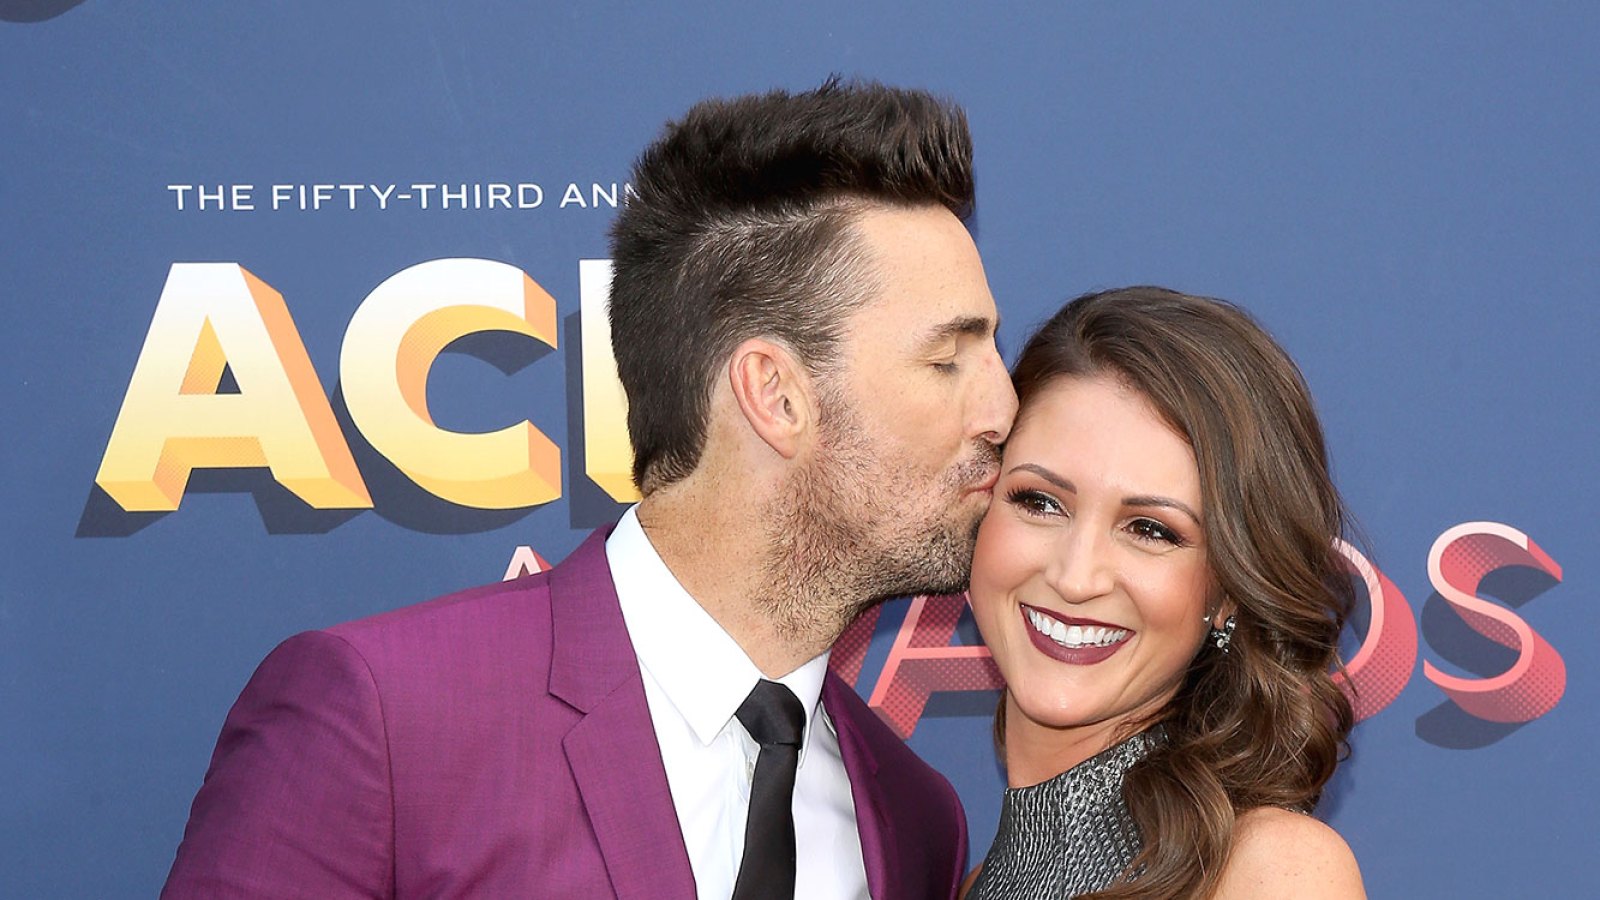 Jake Owen’s Girlfriend Erica Hartlein Gives Birth to Their First Child Together, His Second